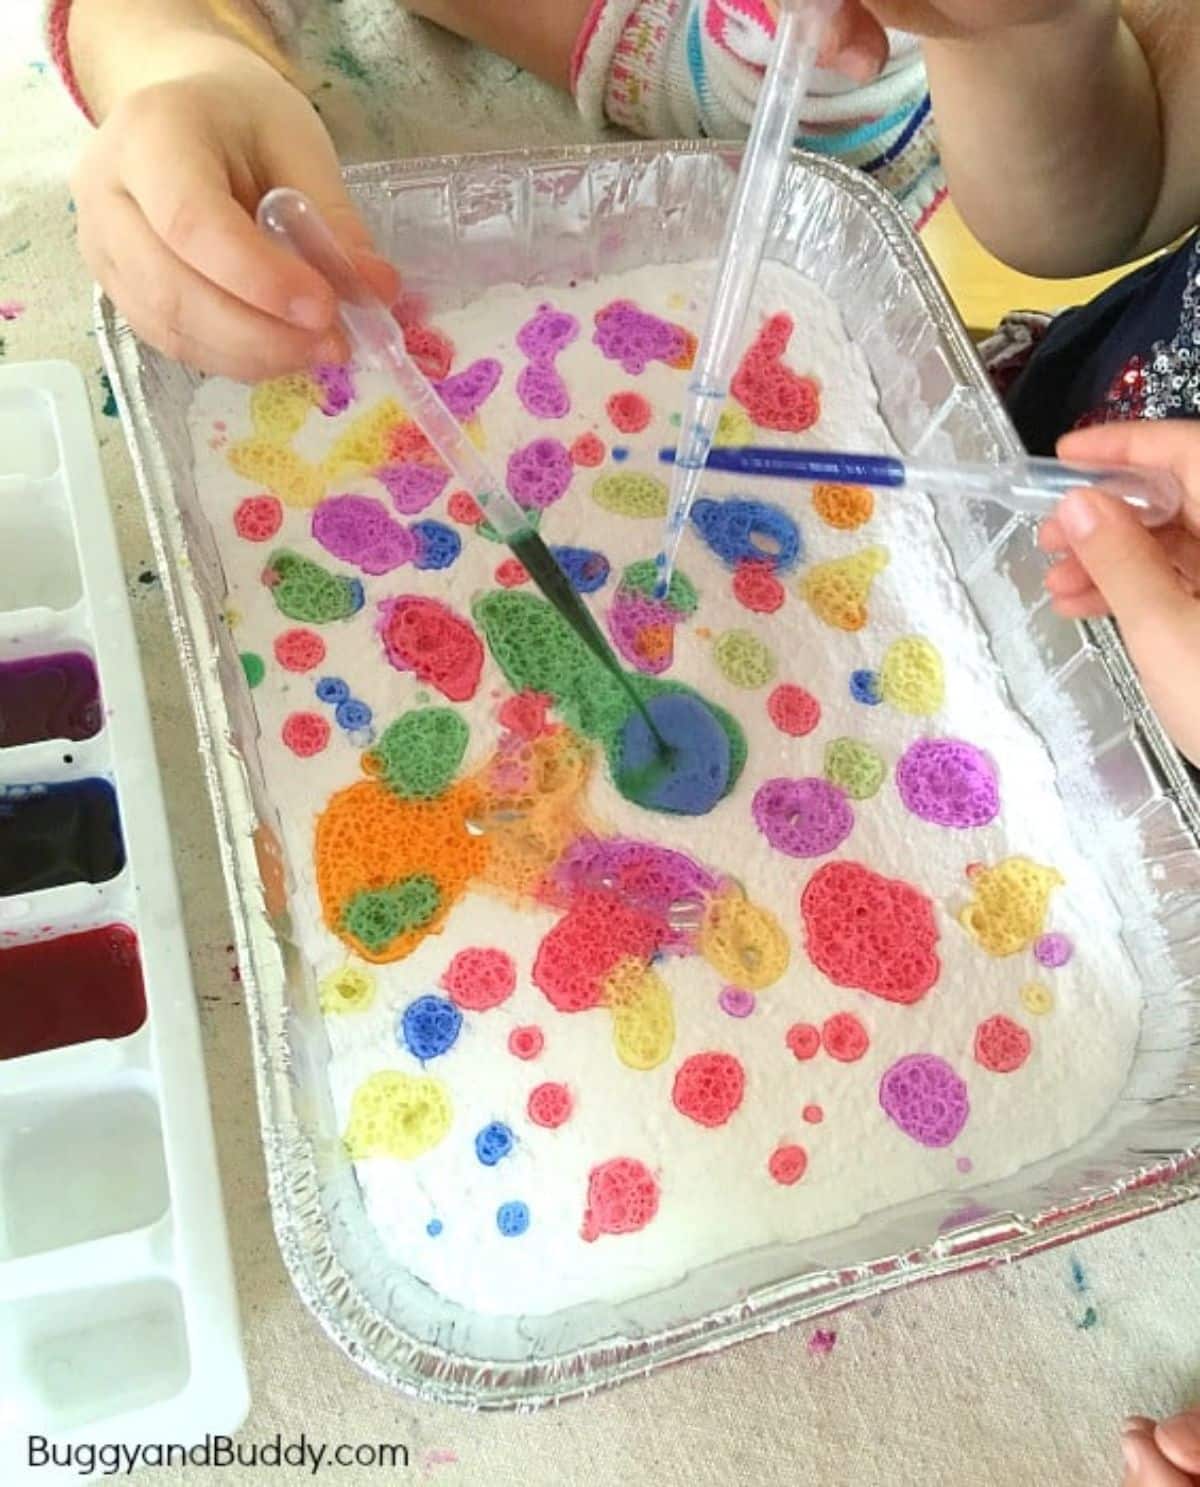 Hands are pouring colours from pippets to foil container.